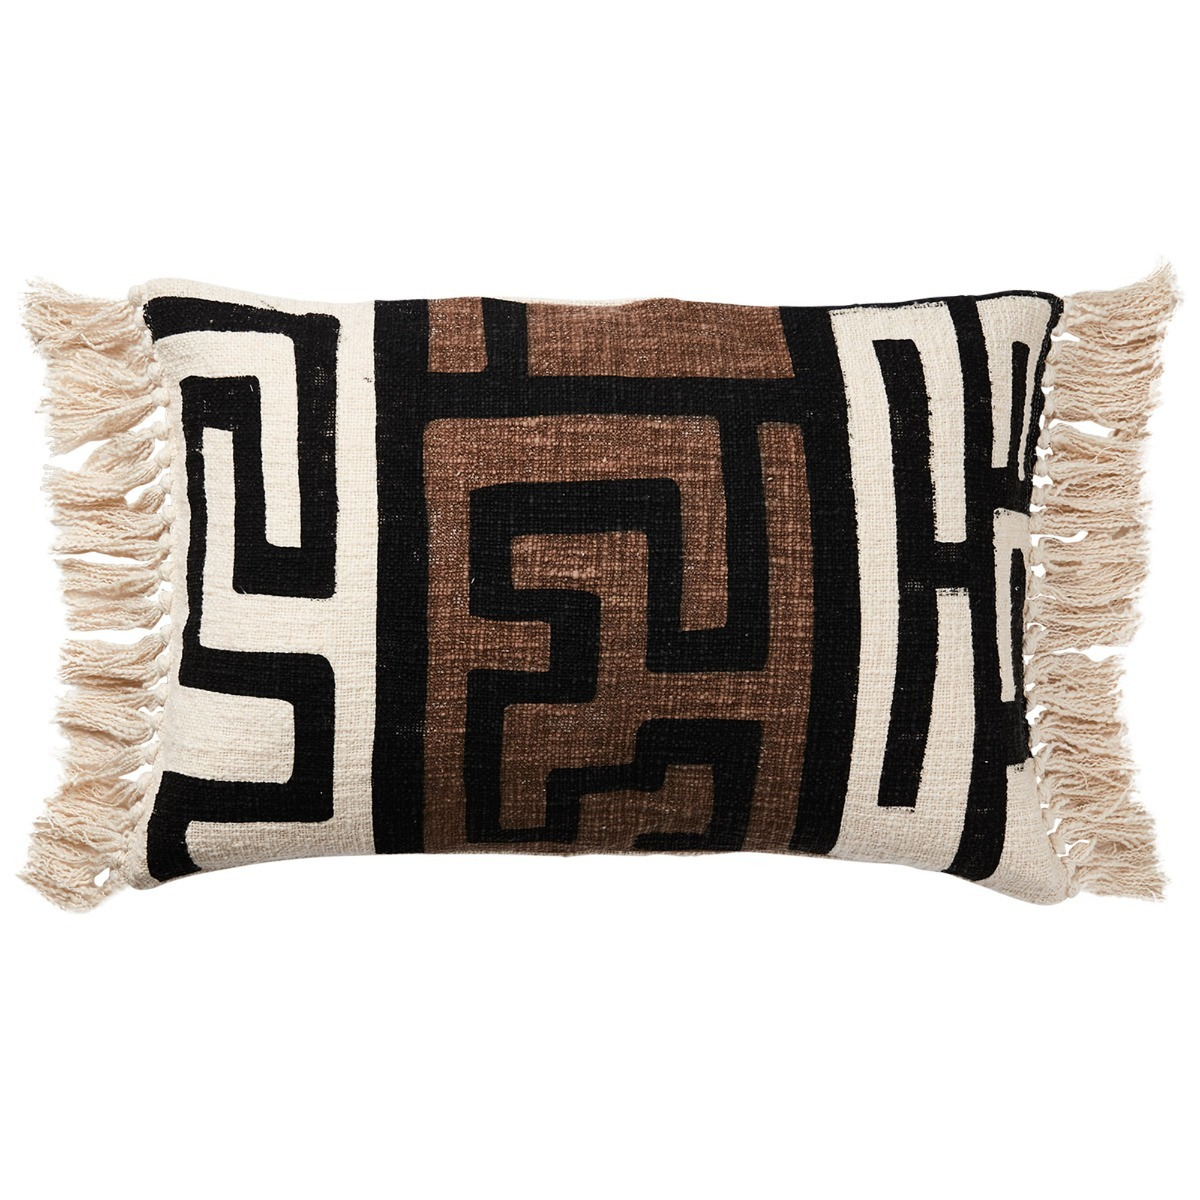 Brown Aztec Cushion, Square Fabric - Barker & Stonehouse - image 1